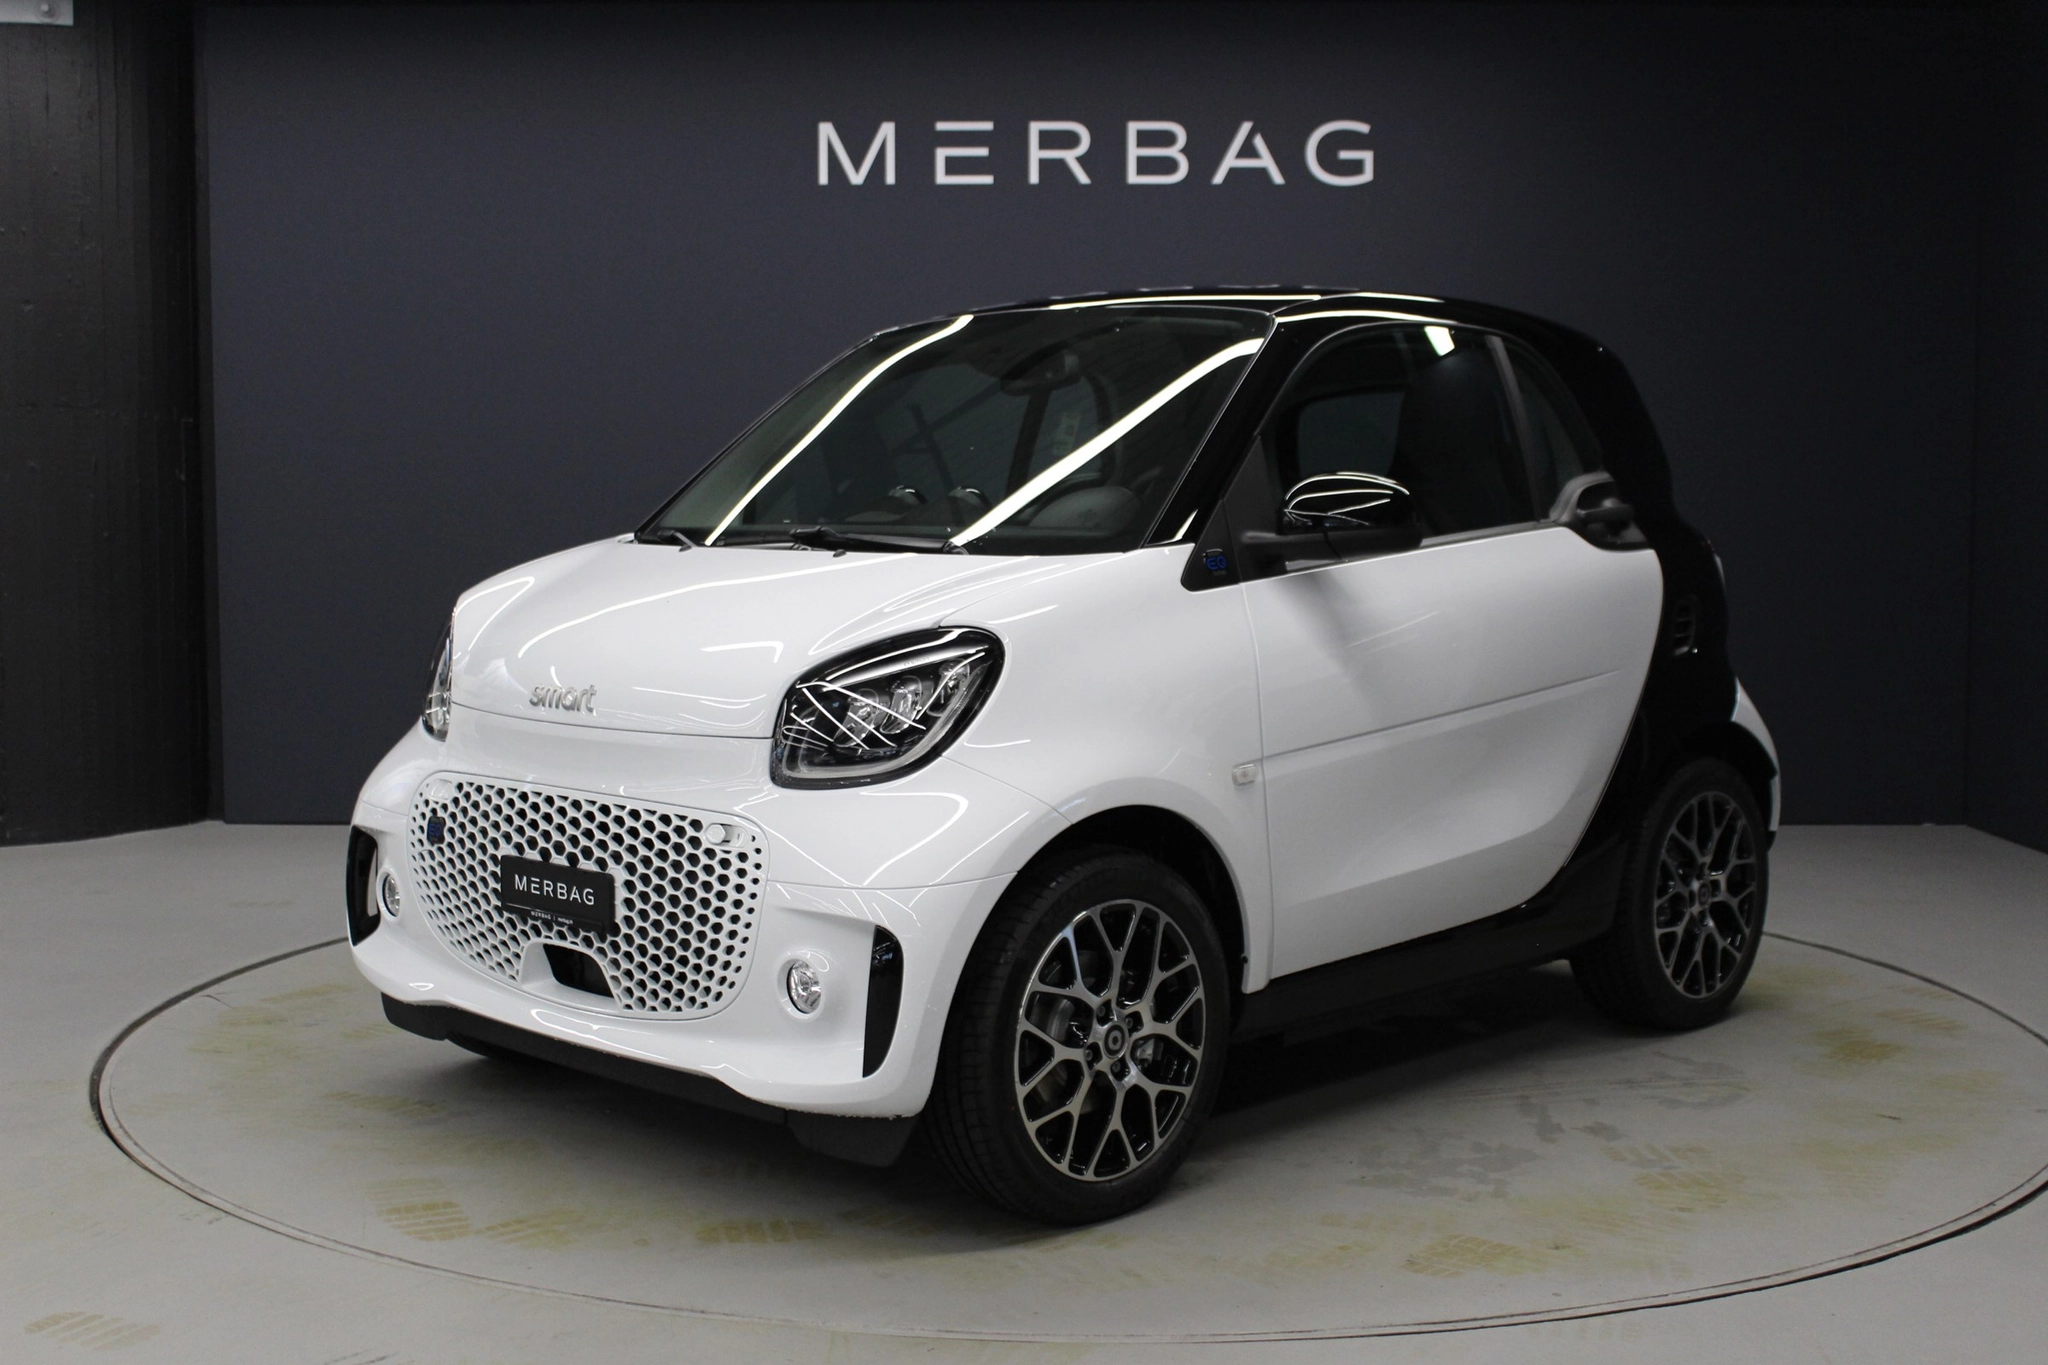 SMART-fortwo-car-image